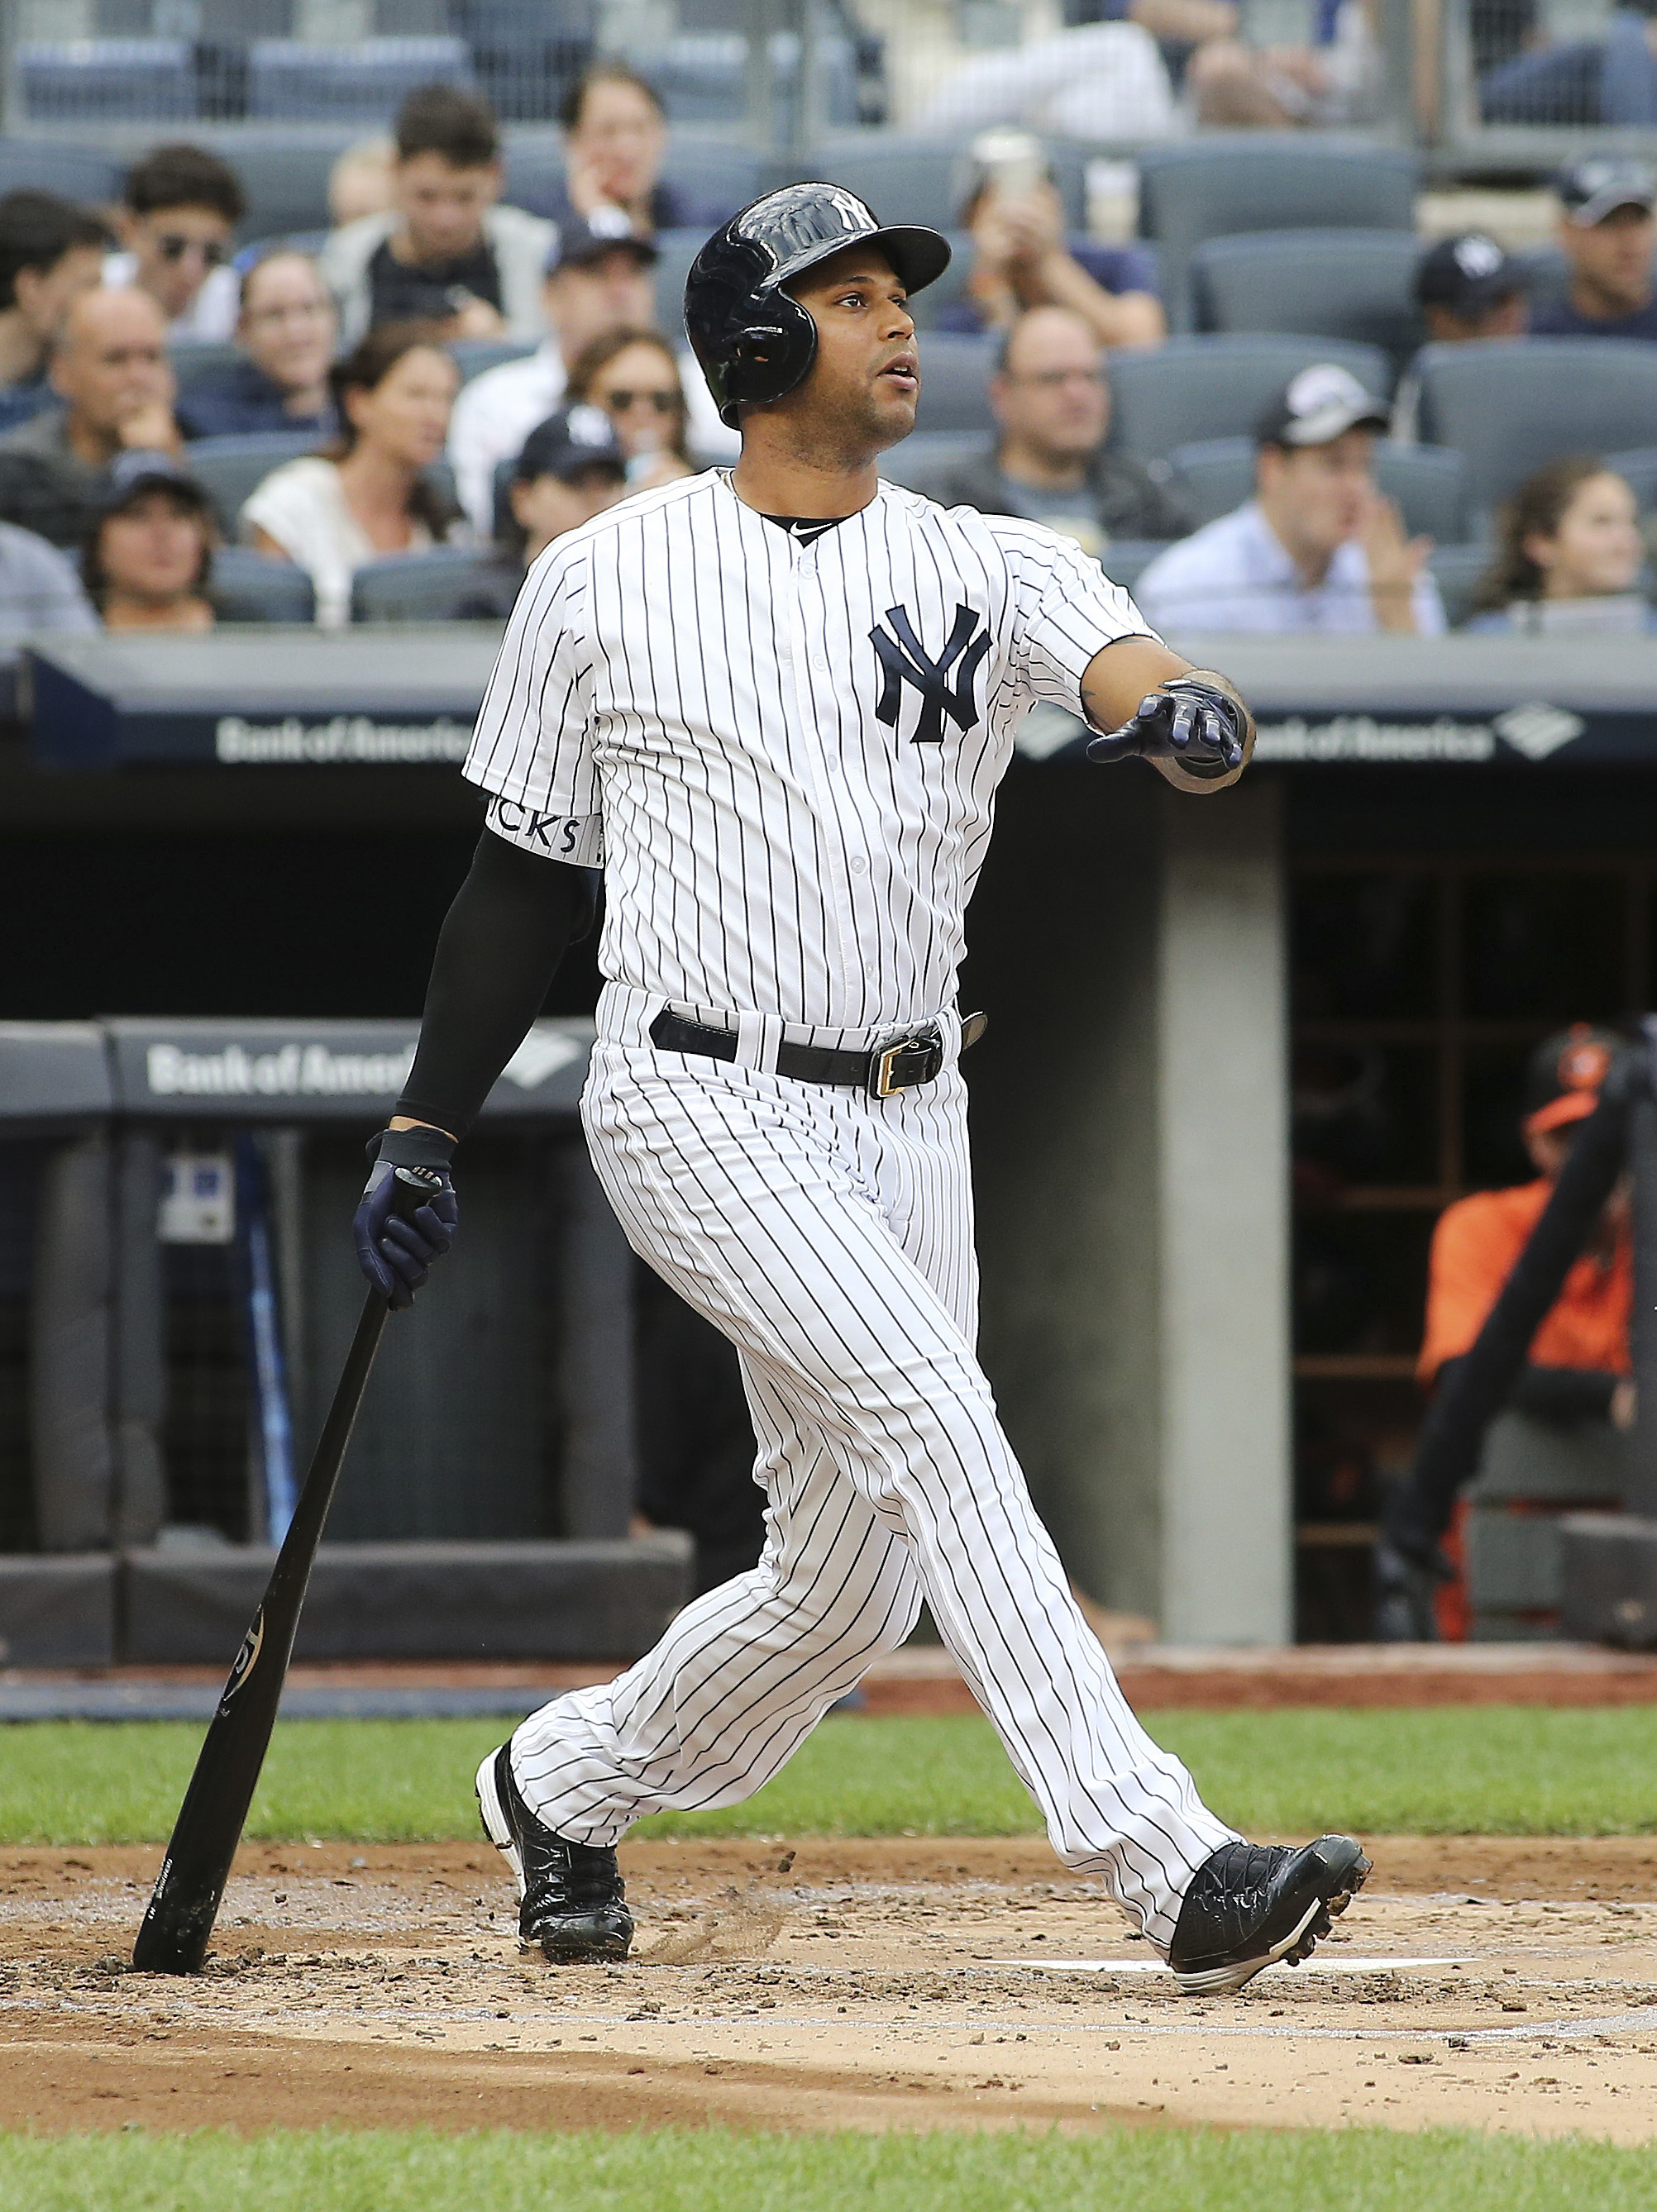 Mlb Rumors Aaron Hicks Landing Spots For Yankees Fans To Laugh At | Hot ...